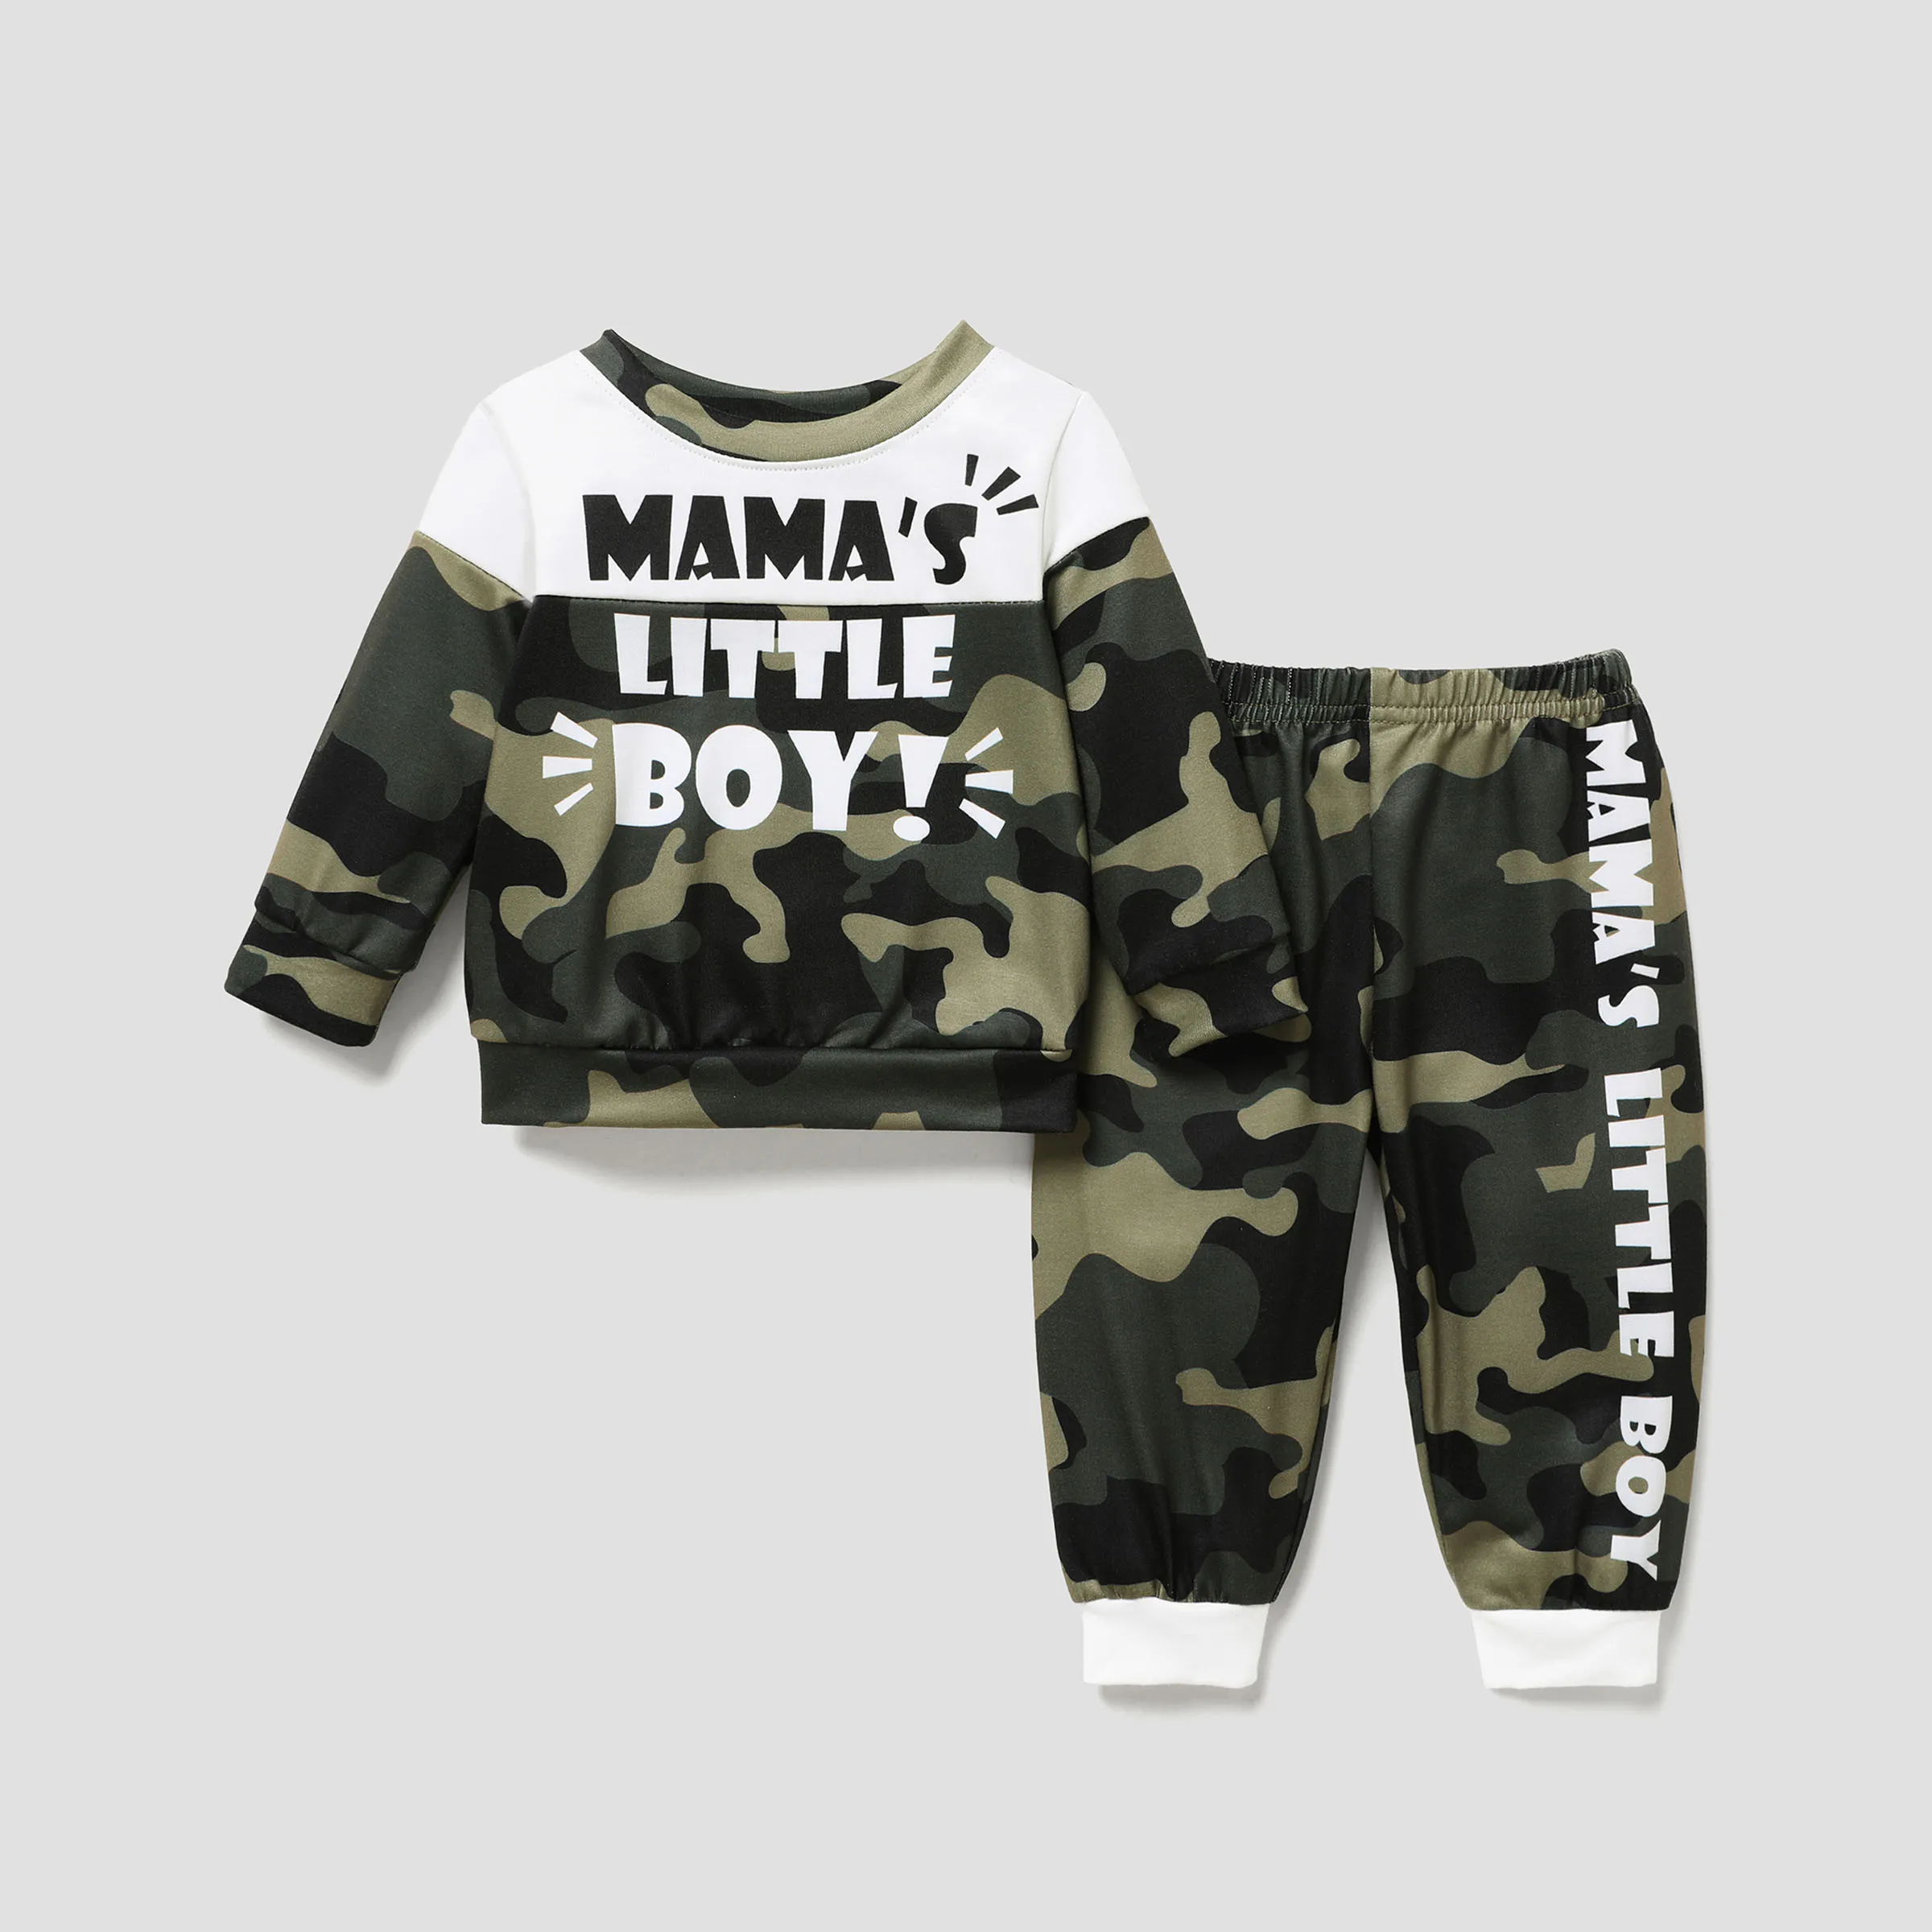 2pcs Baby Boy Casual Camouflage Letter Pattern Set